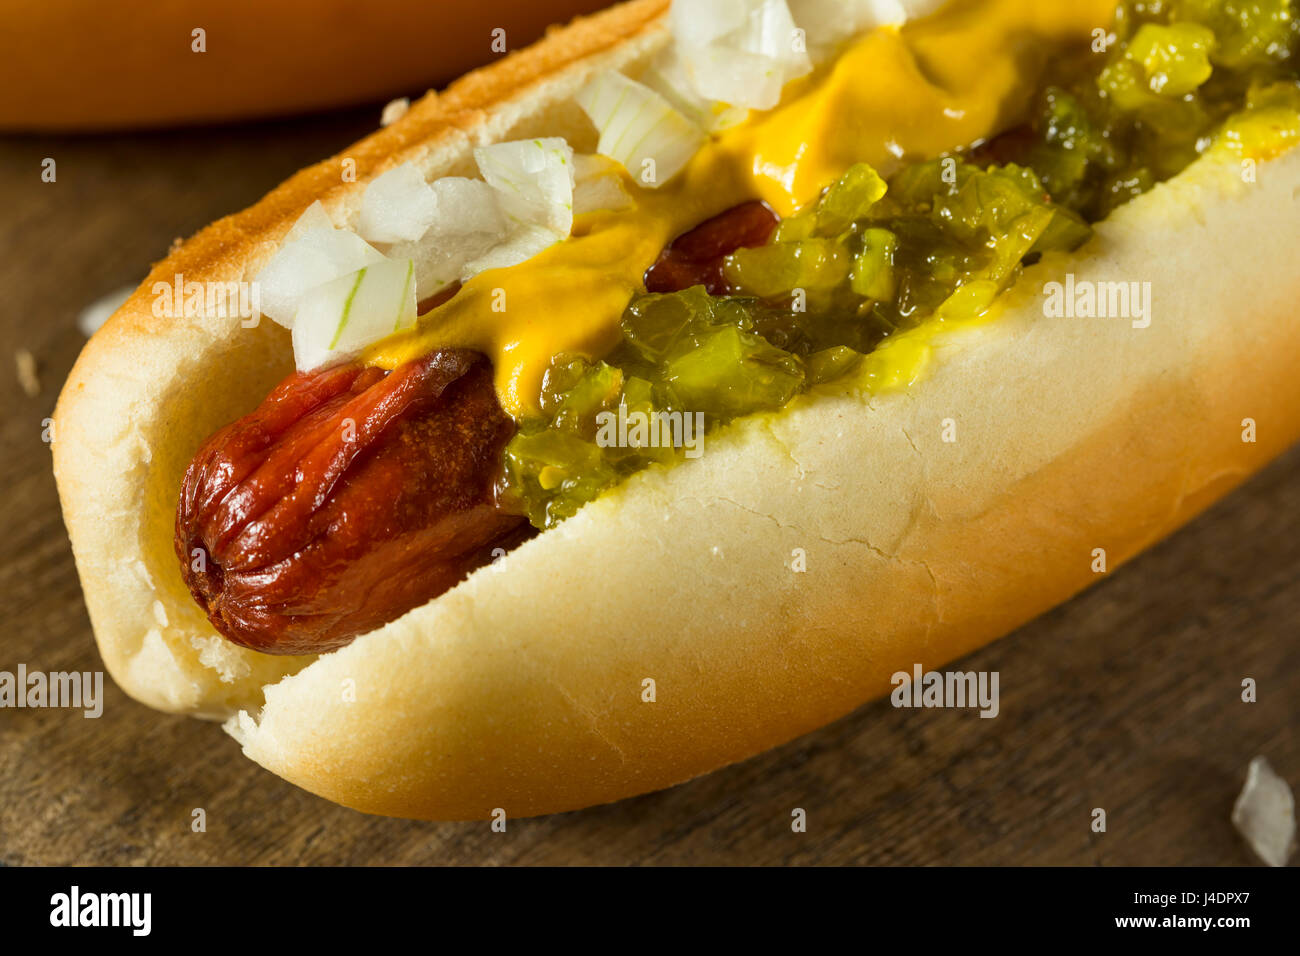 Premium Photo  A hot dog with onions and mustard on it